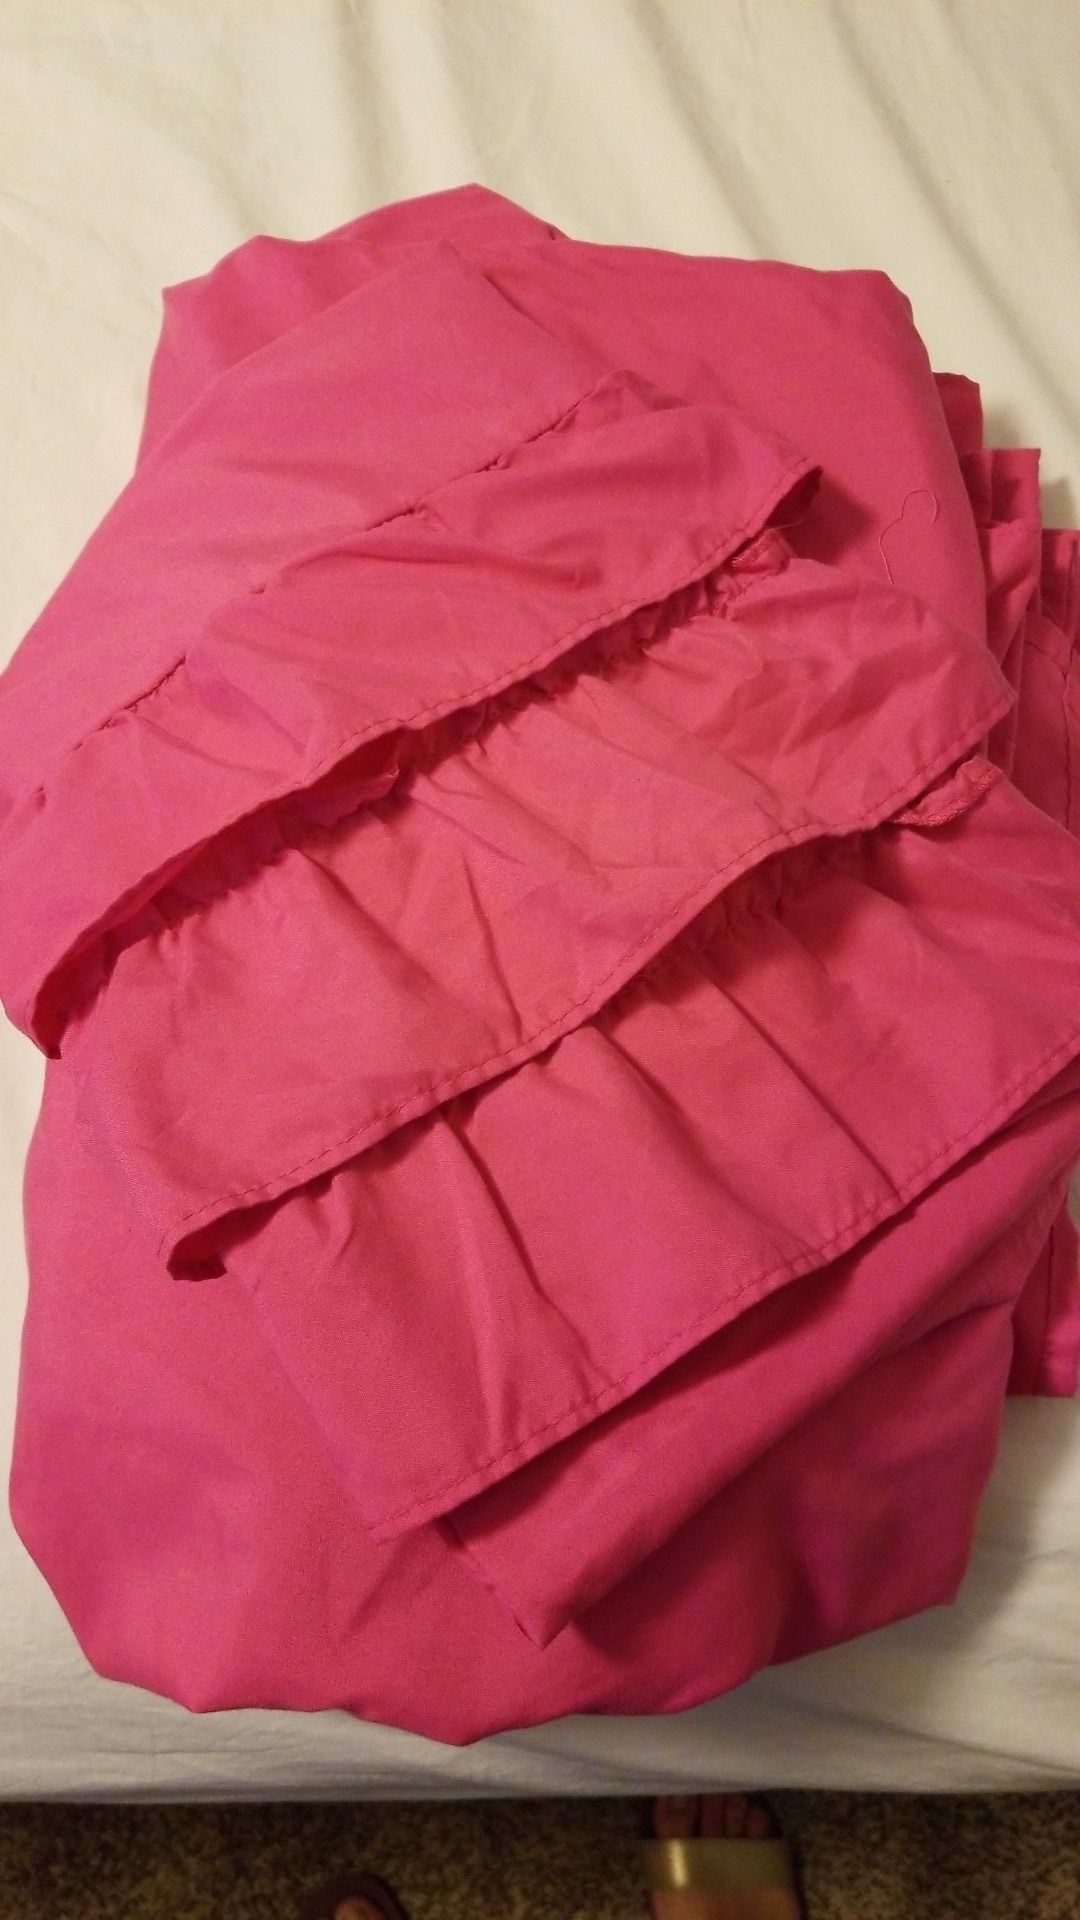 Full size Hot pink sheets